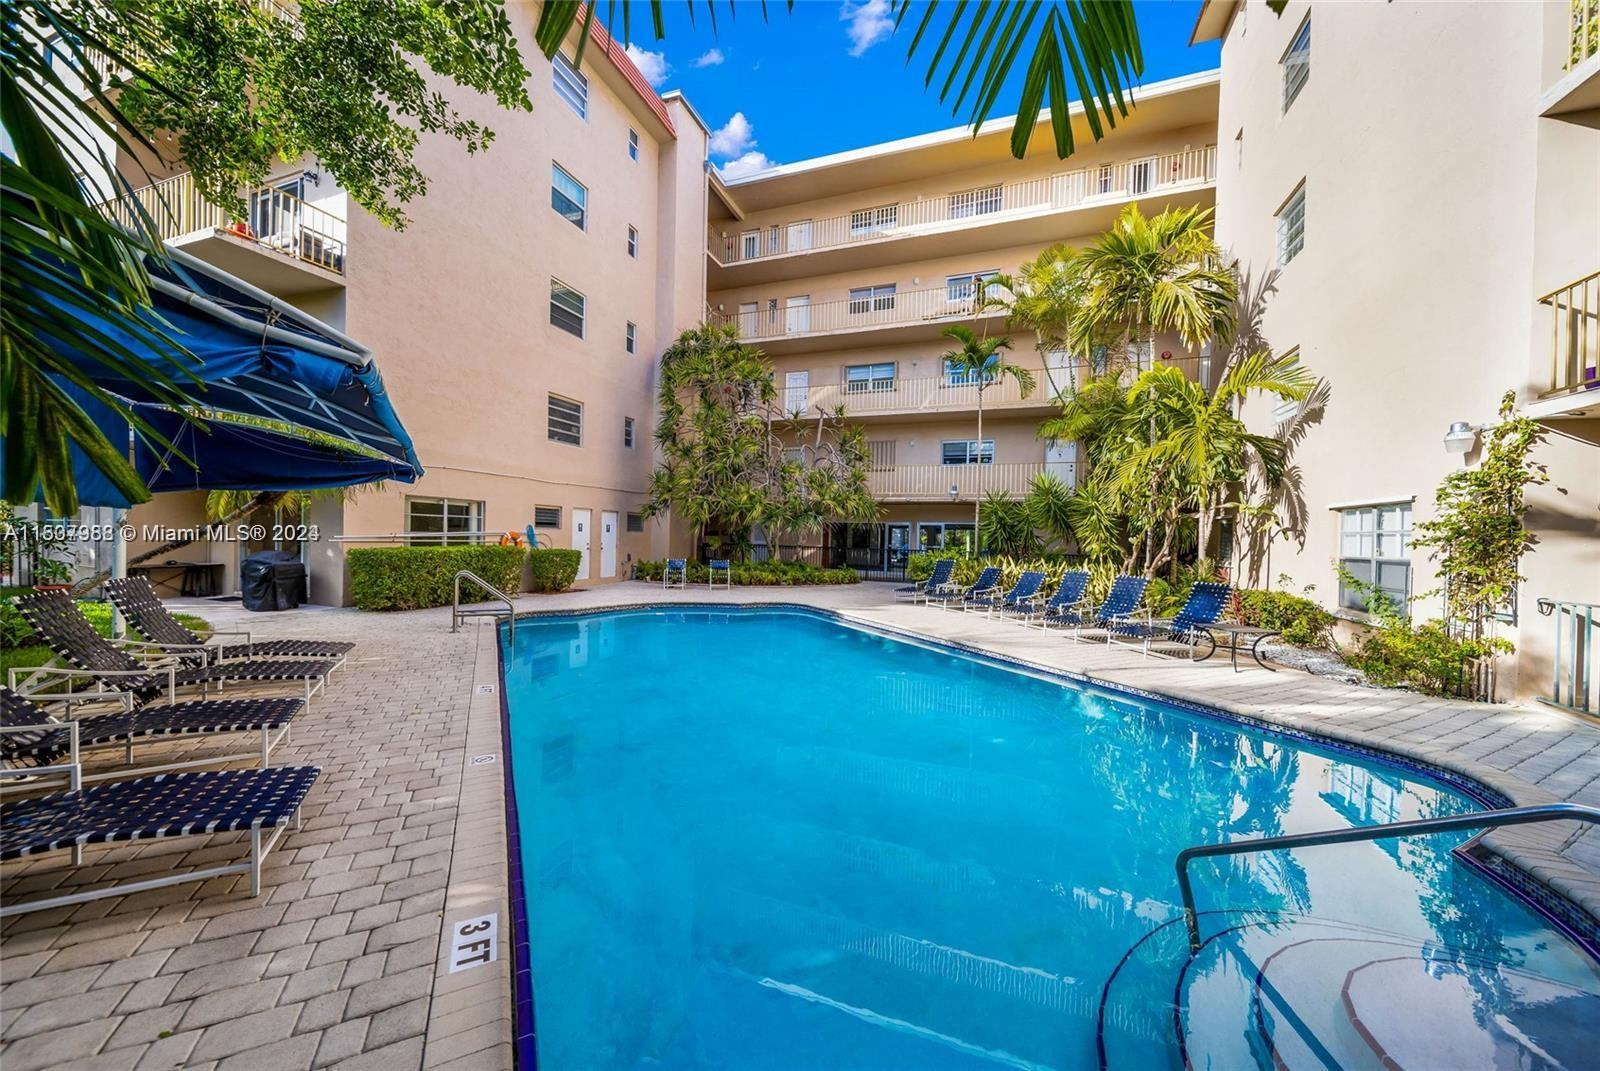 Price to sell !
This condo is located in a prime location, just a few blocks from restaurants, shopping and the beaches (.5 Miles). This condo bldg is well managed & has passed its 50 year recertification. 3rd floor, elevator, Spacious condo with 2 bed/ 2bath | balcony | storage | pool | Social room | Barbacue. 50-year recertification approved. Only 25 units.  
Best neighborhood near the best school (10)
As per the condo association NO renting during the first 2 years of Ownership. Then unit can be rented once per year. 1 assigned parking space + guest parking
Owner motivated.